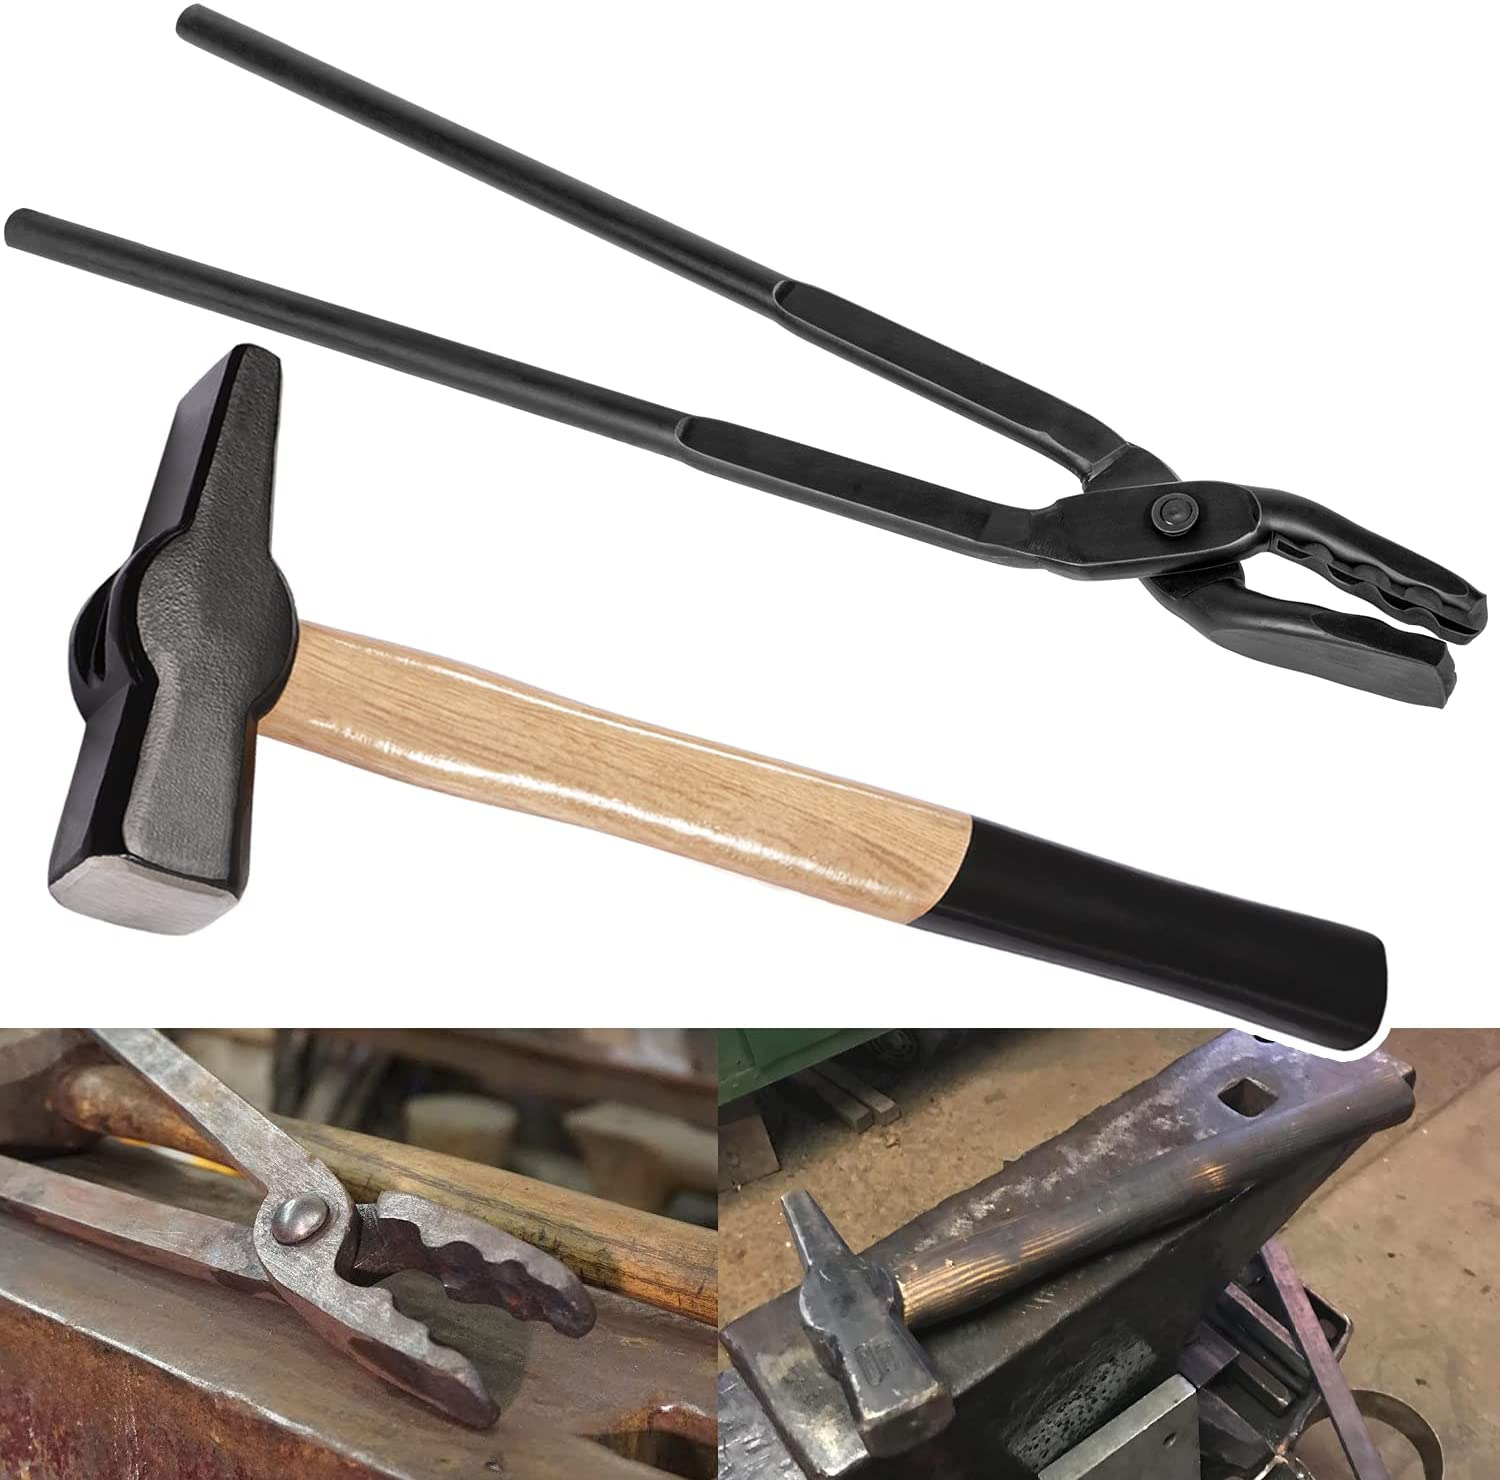 Blacksmith 17” Wolf Jaw Tongs and Hammer Tool Set Essential Tools for Blacksmith